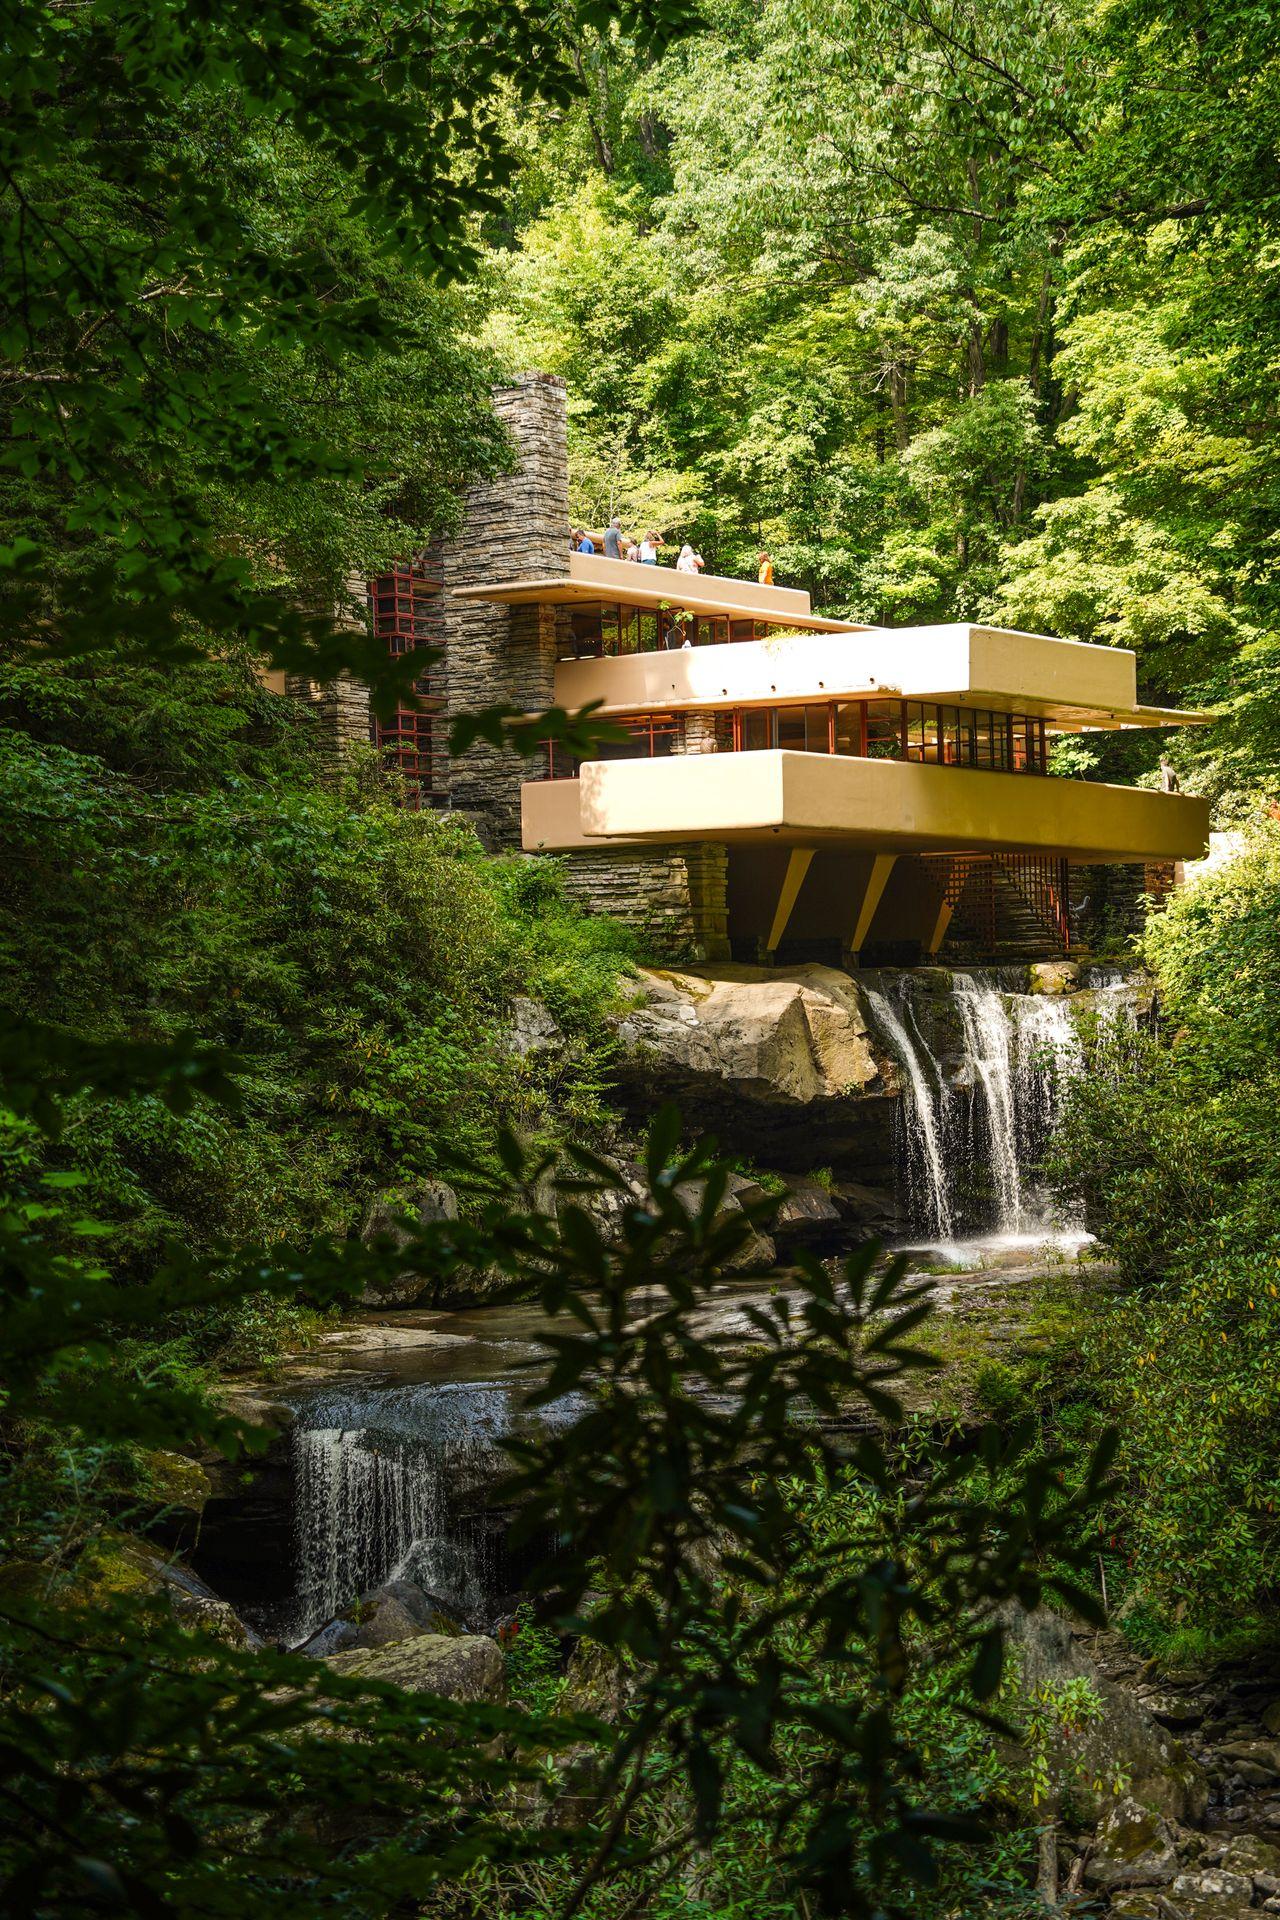 A view of Fallingwater, a brick home with a couple of large balconies. The home is built over a two-layered waterfall.